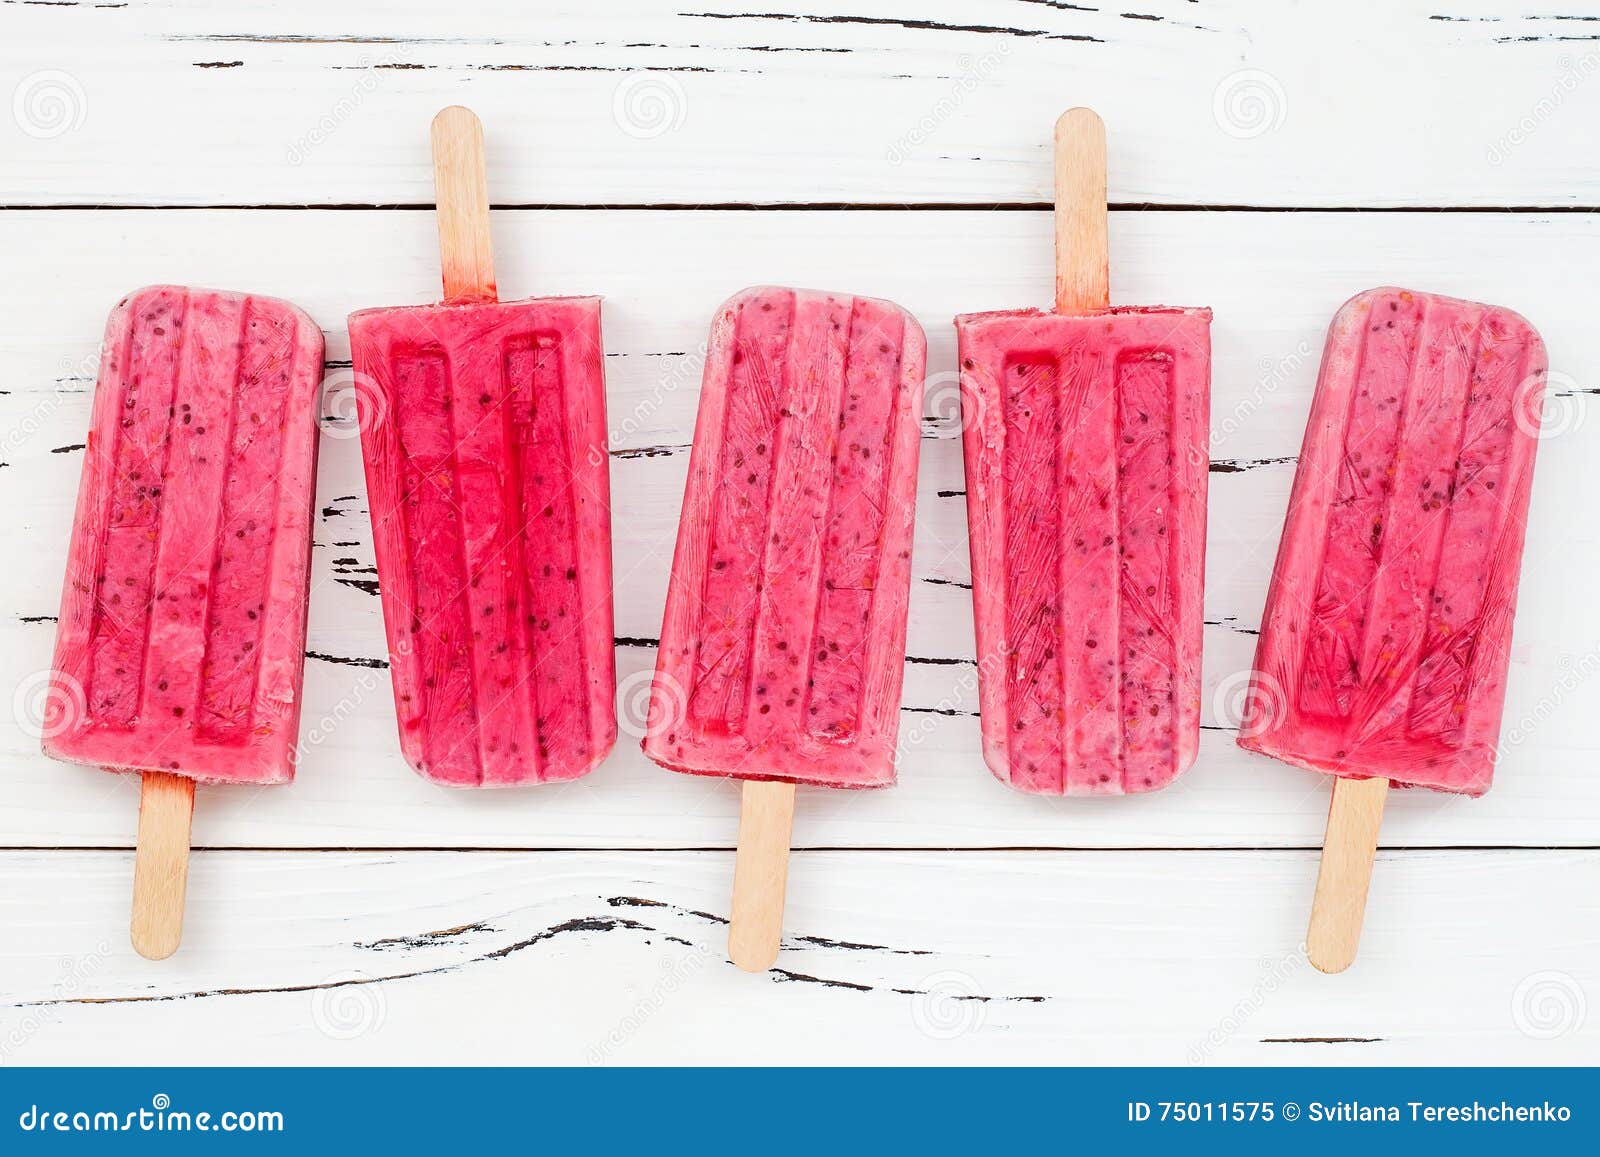 homemade vegan raspberry coconut milk popsicles - ice pops - paletas with chia seeds on rustic white wooden background.